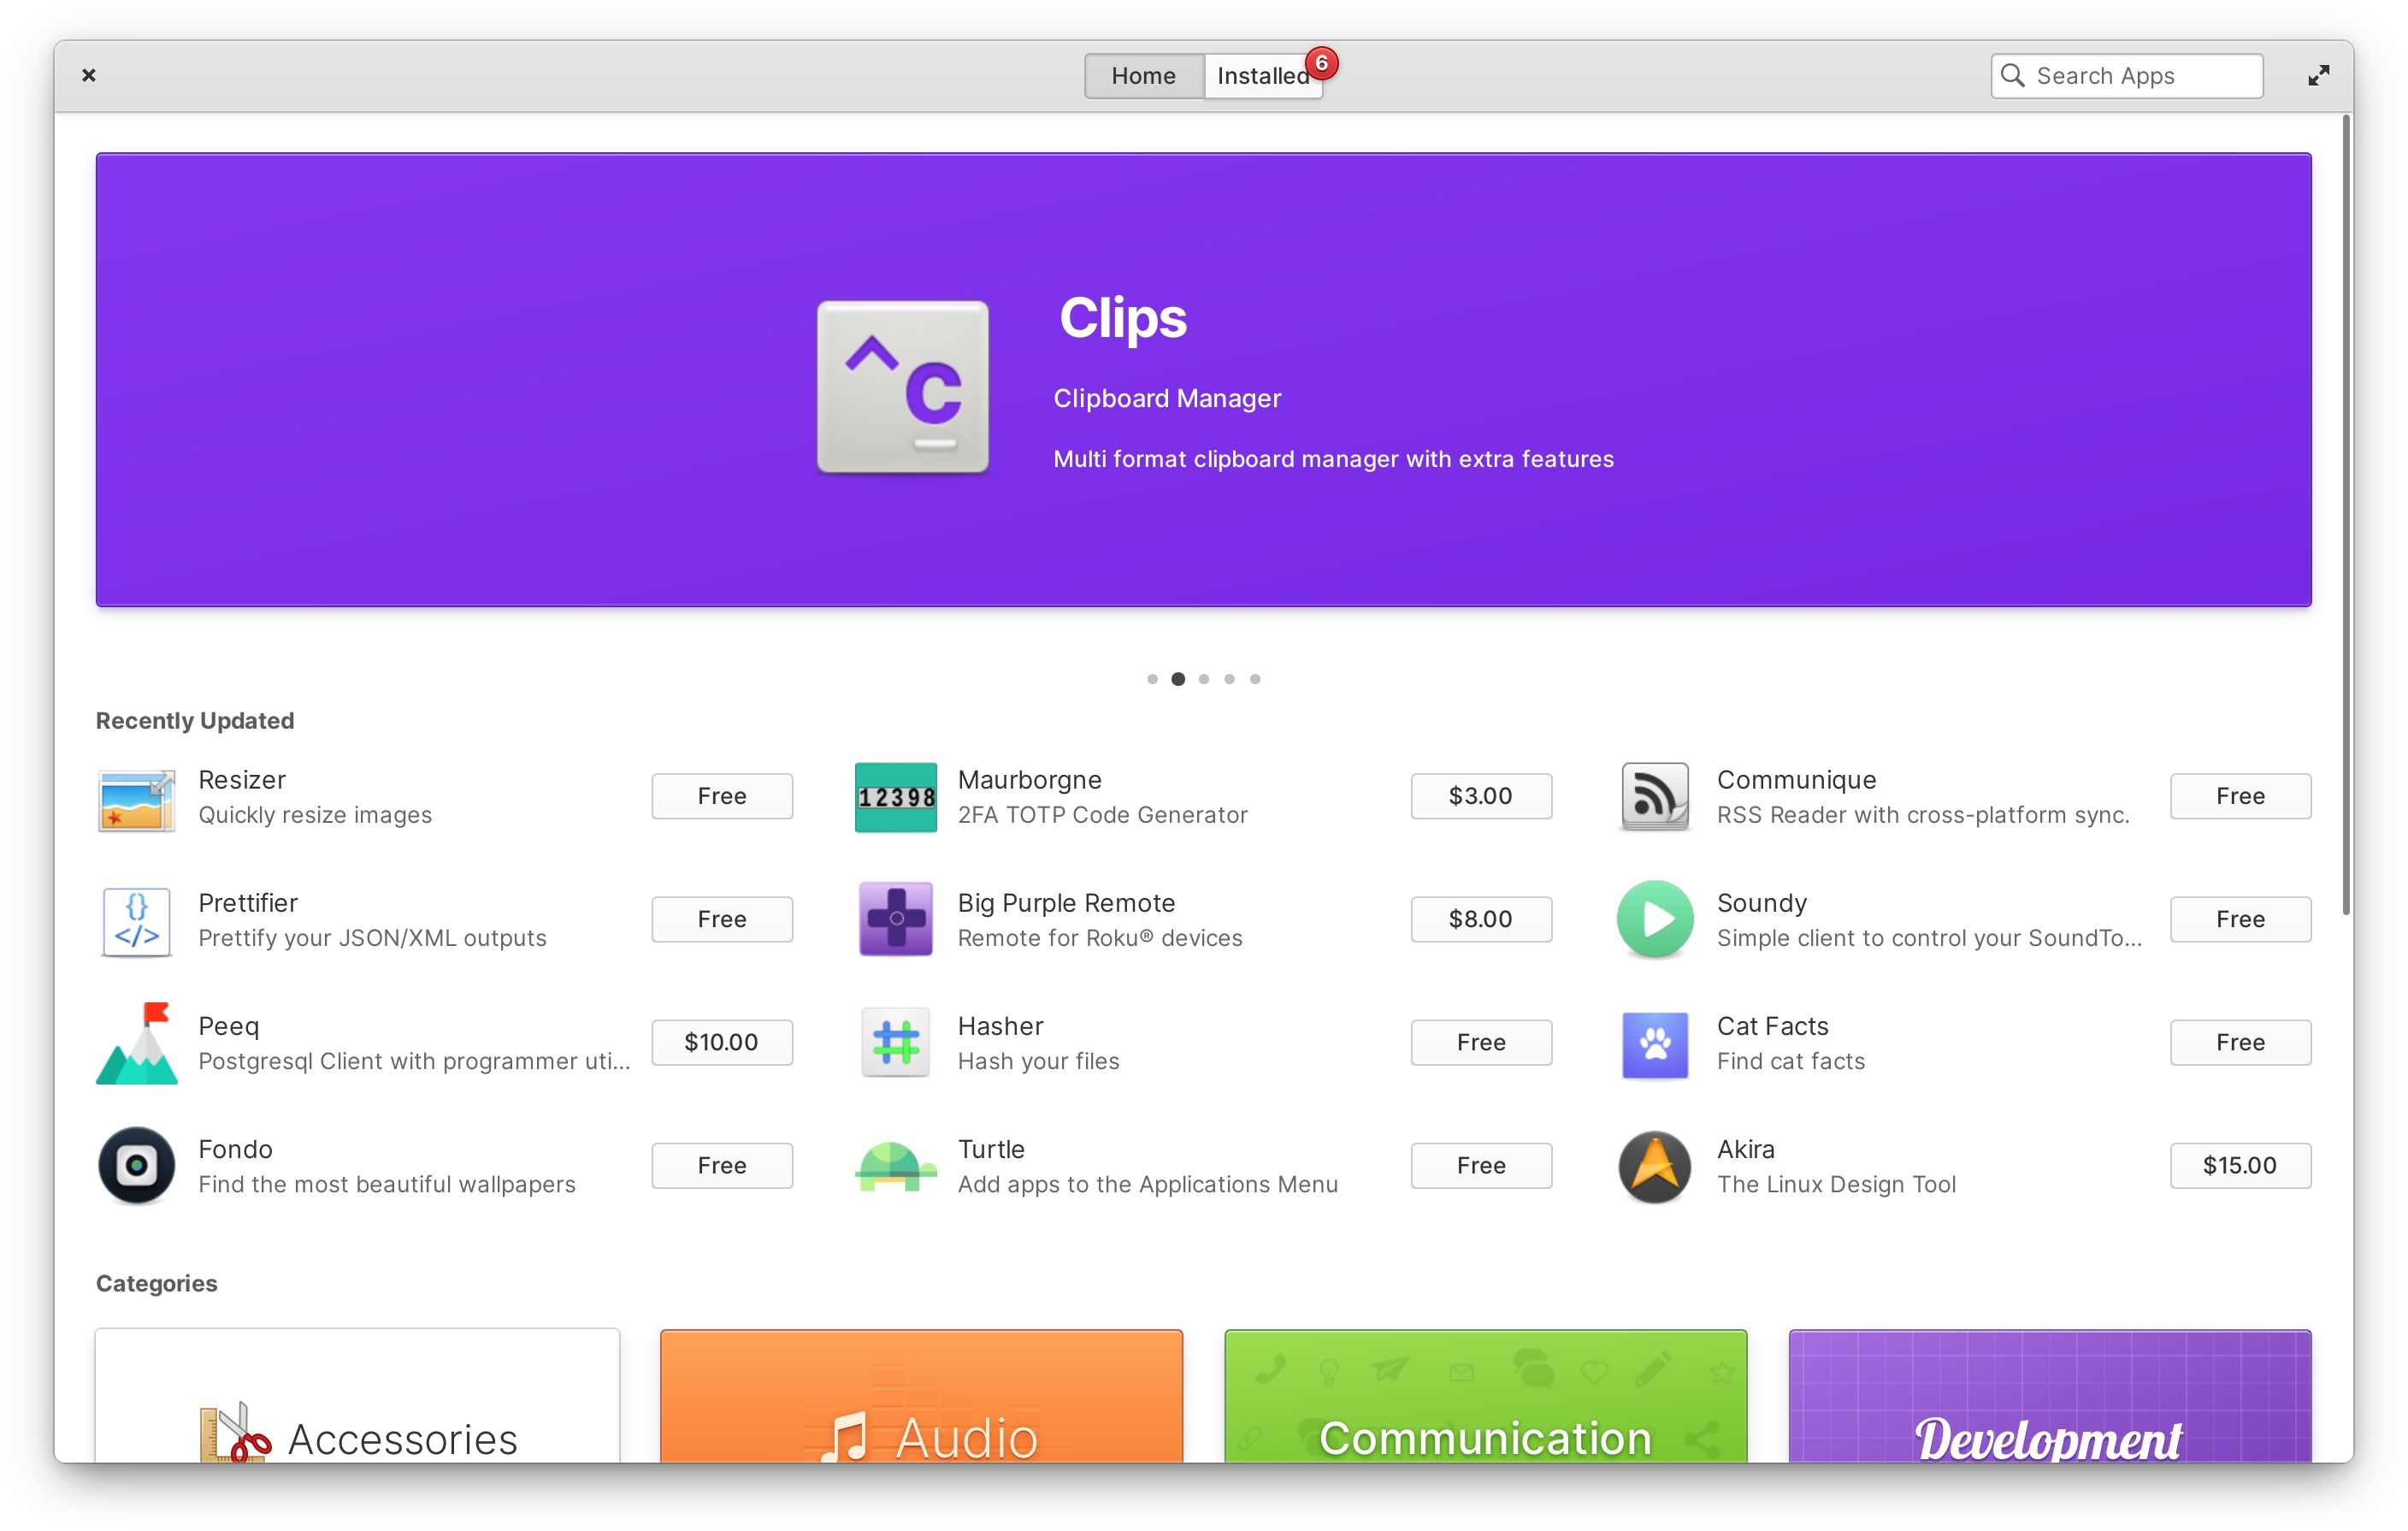 elementary os appcenter home page